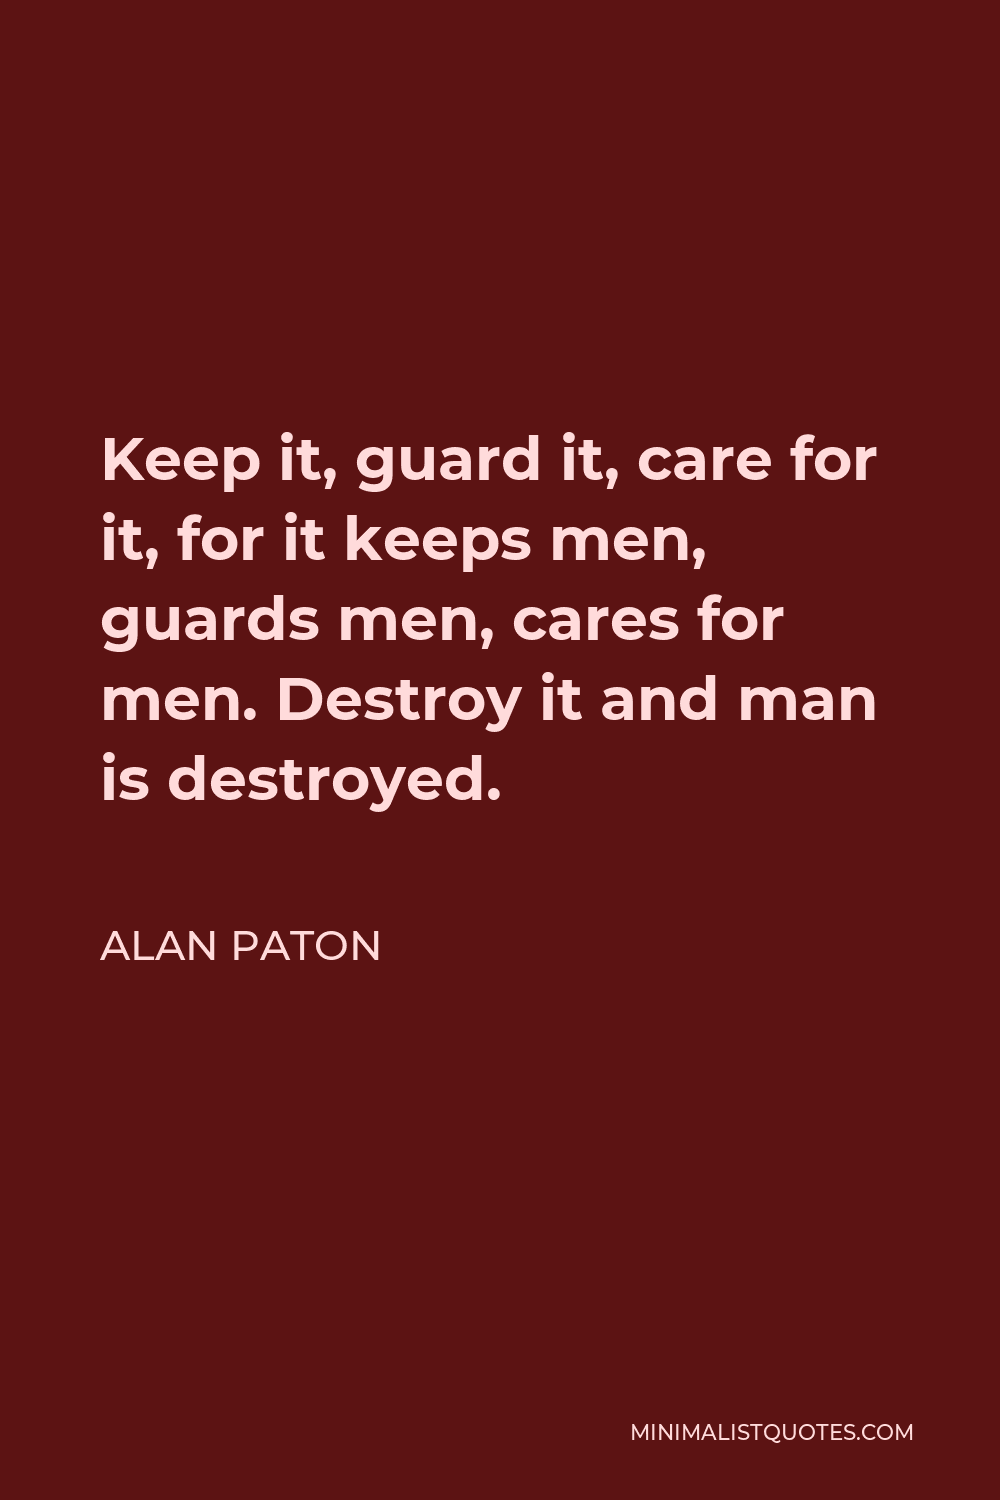 Alan Paton Quote - Keep it, guard it, care for it, for it keeps men, guards men, cares for men. Destroy it and man is destroyed.